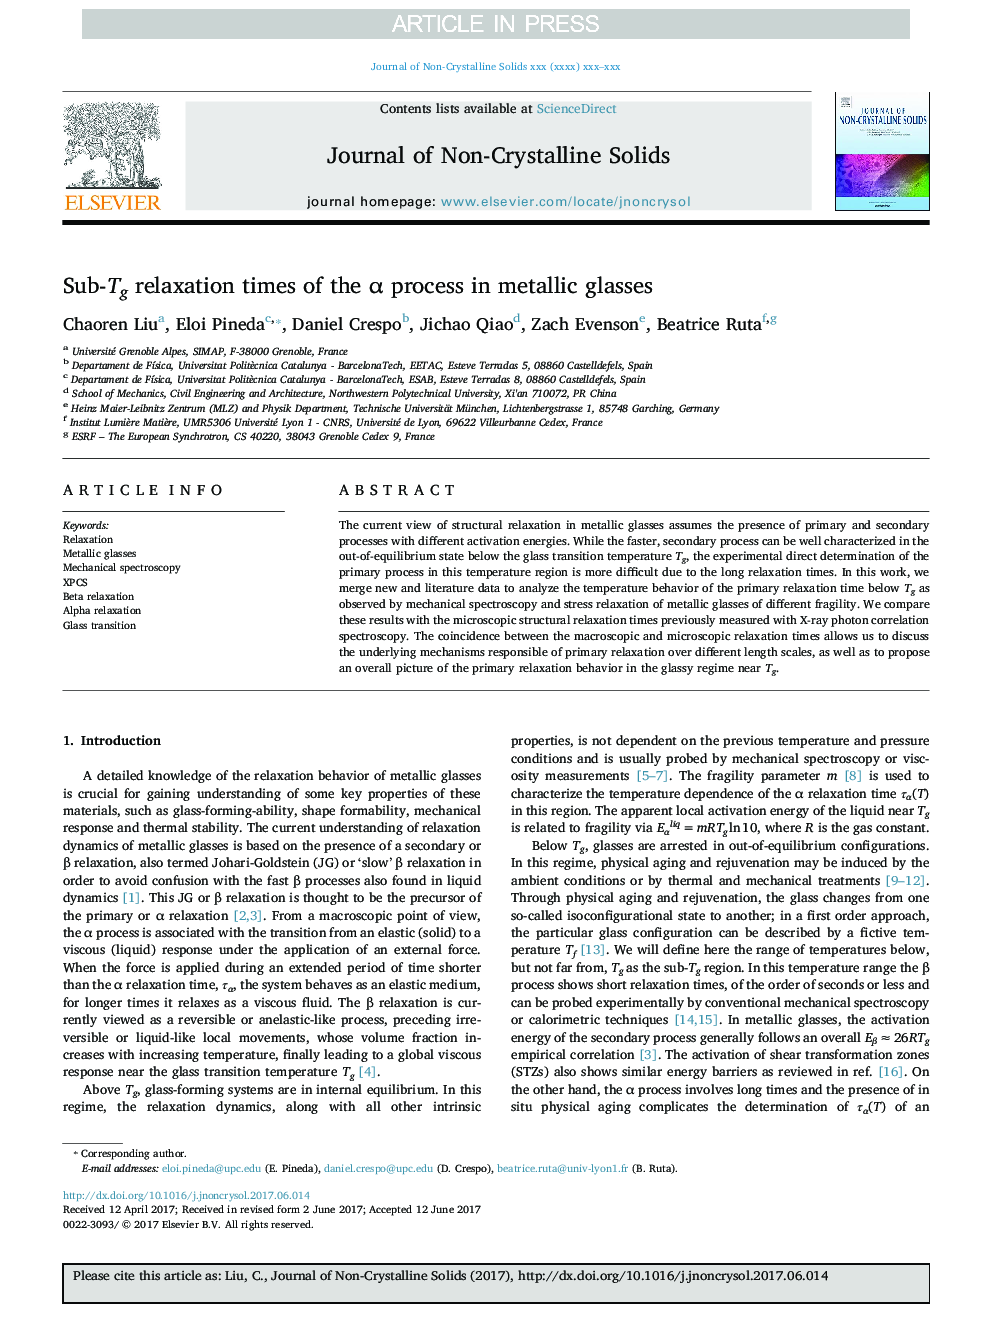 Sub-Tg relaxation times of the Î± process in metallic glasses